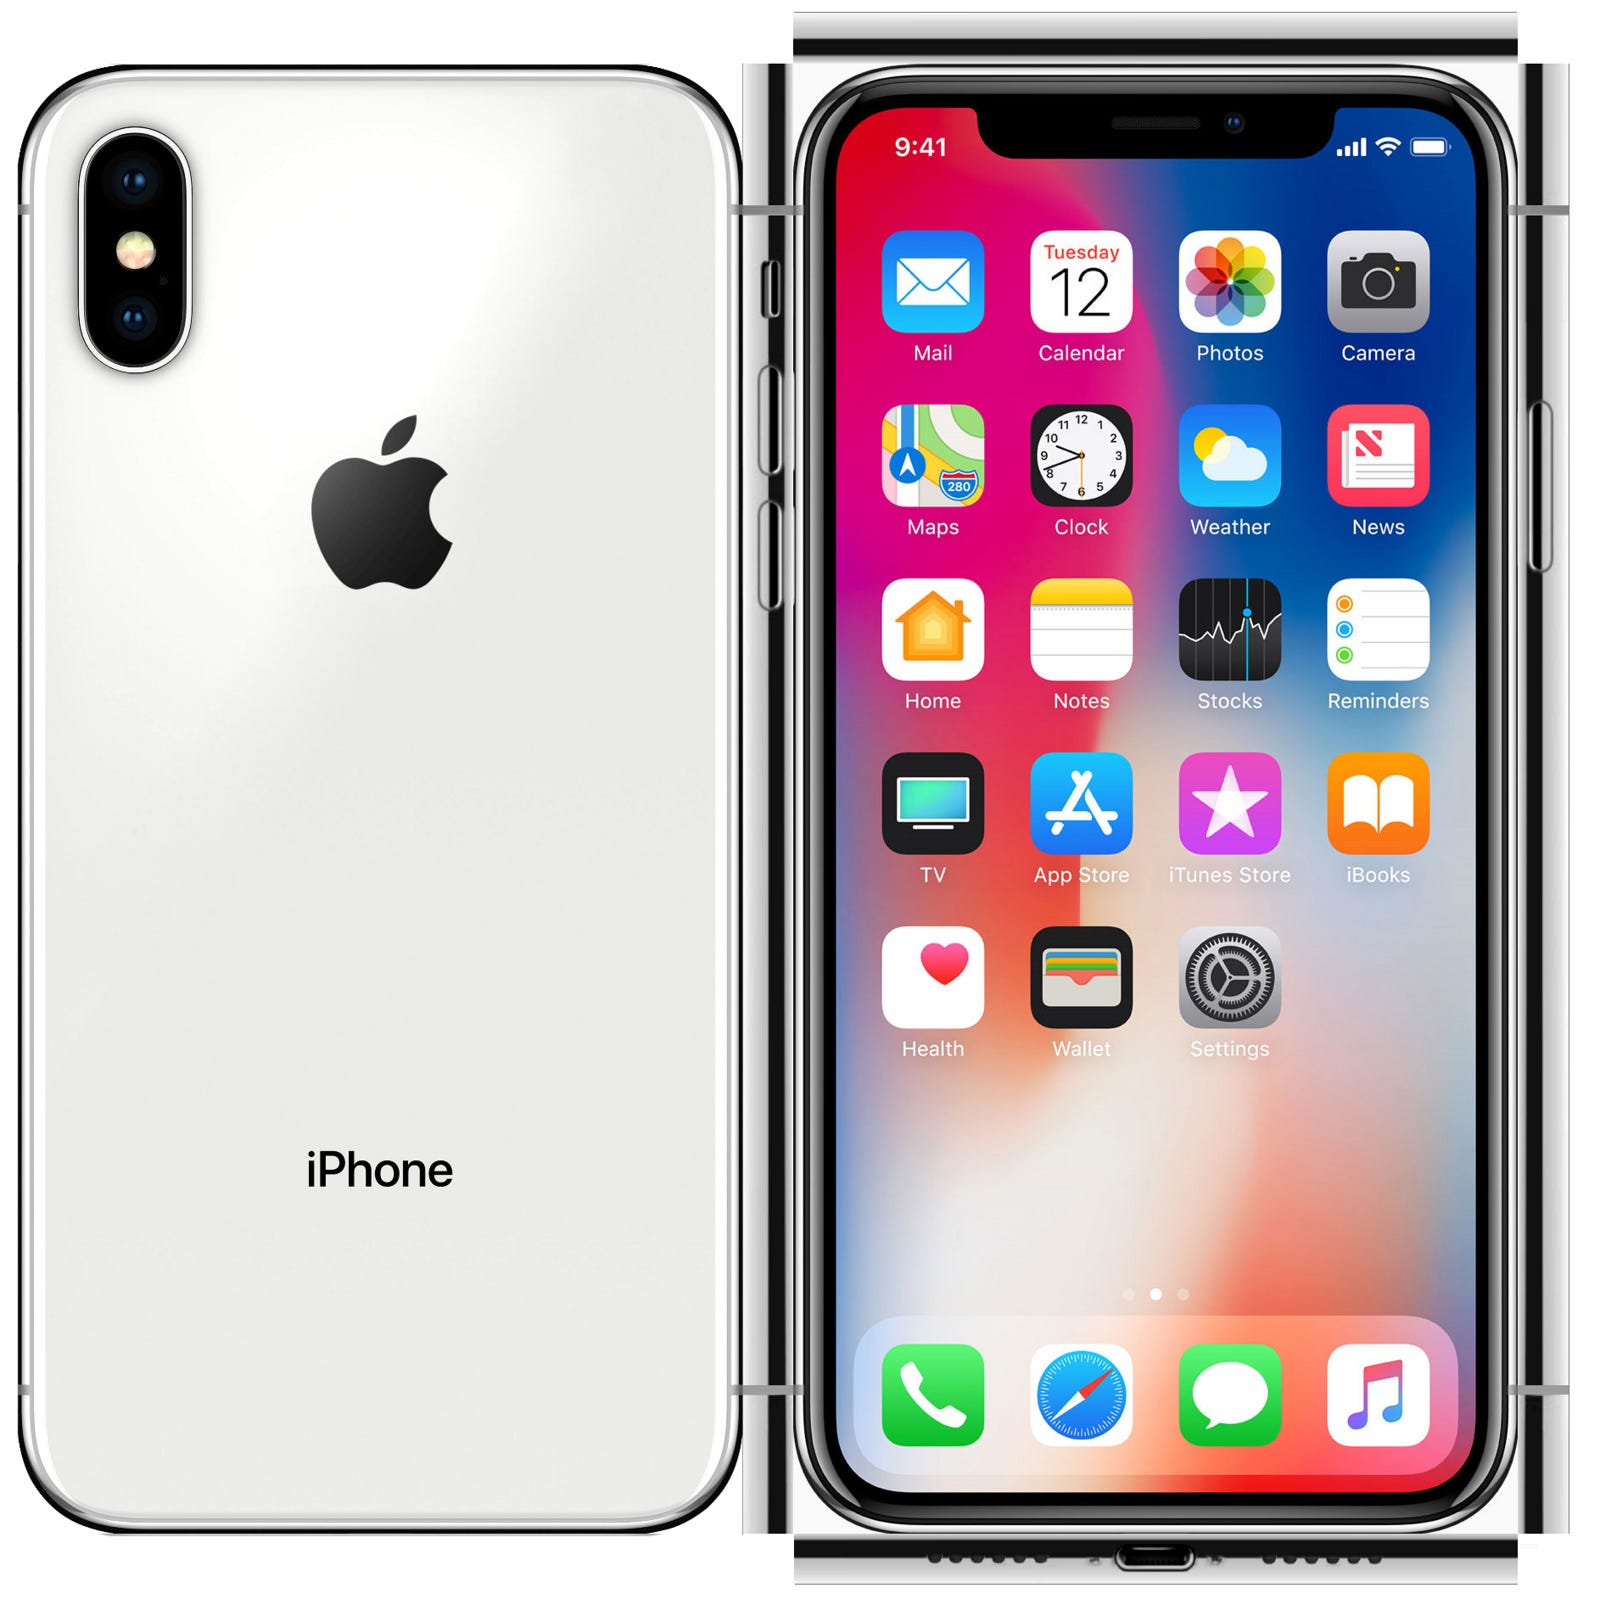 iPhone X Review: My upgrade from iPhone 5S | by Tom Harrison | Tom  Harrison's Blog